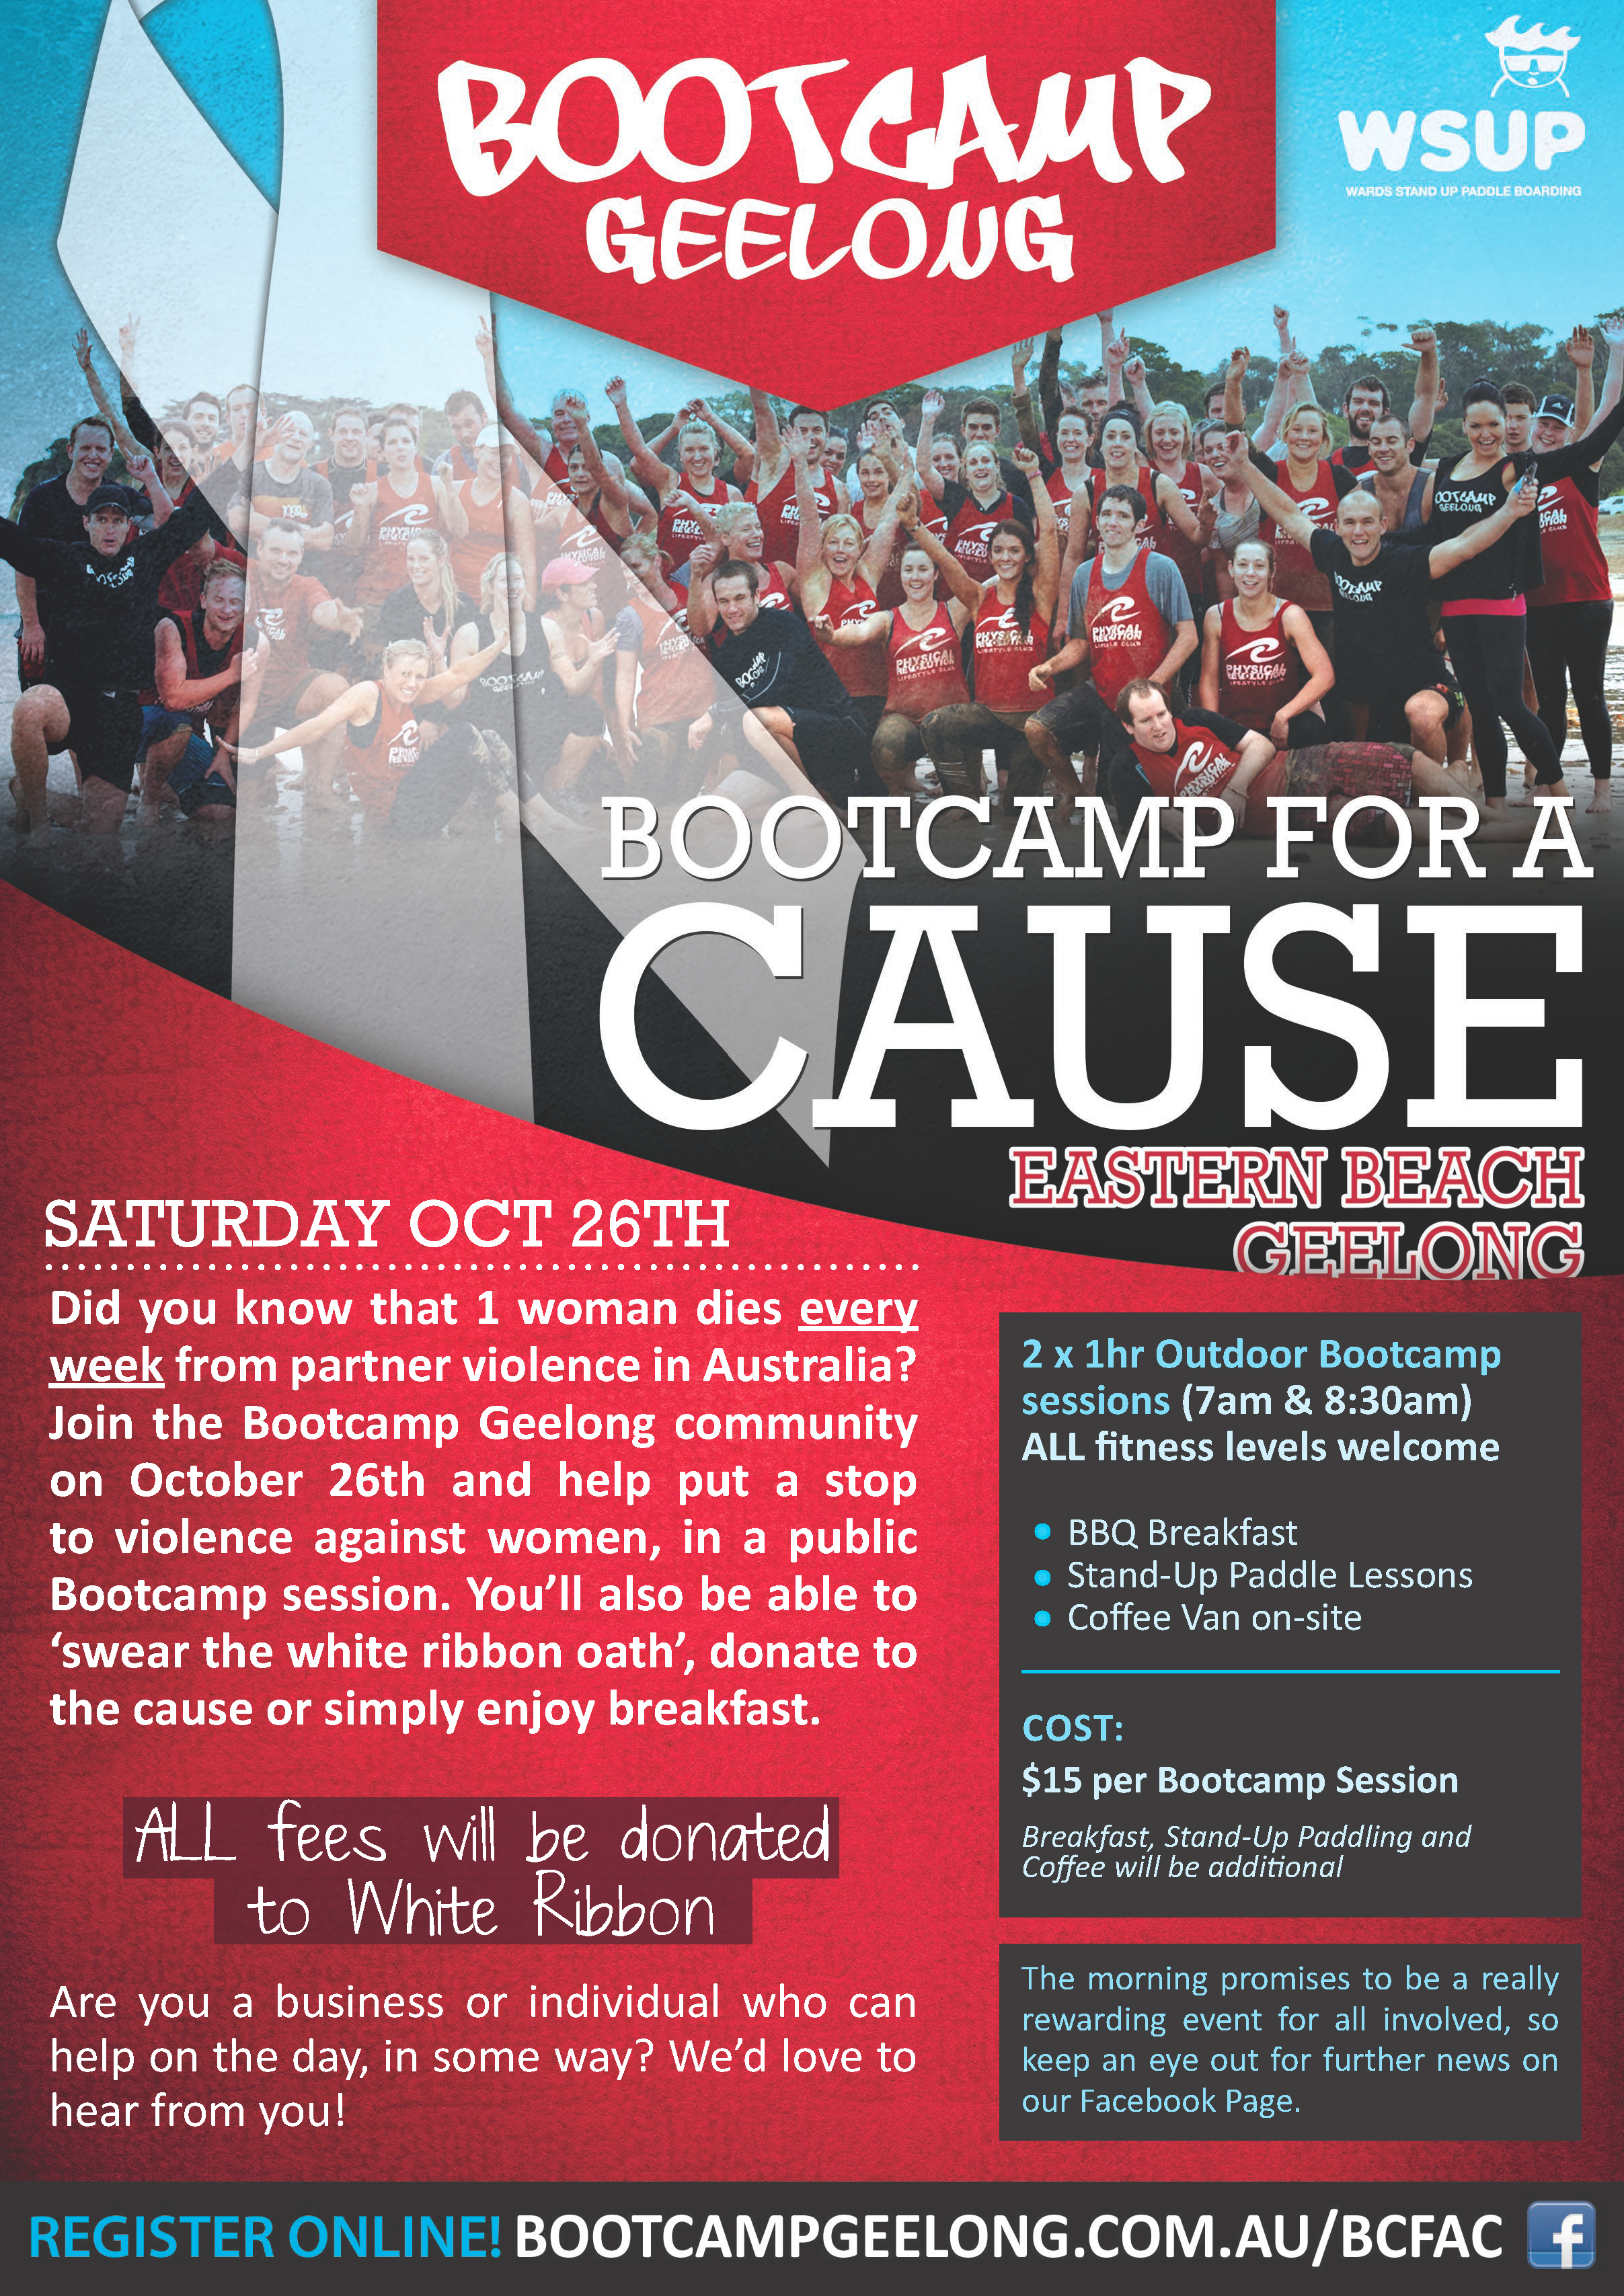   Bootcamp Geelong&nbsp; promotional poster for "Bootcamp for a Cause".&nbsp; 